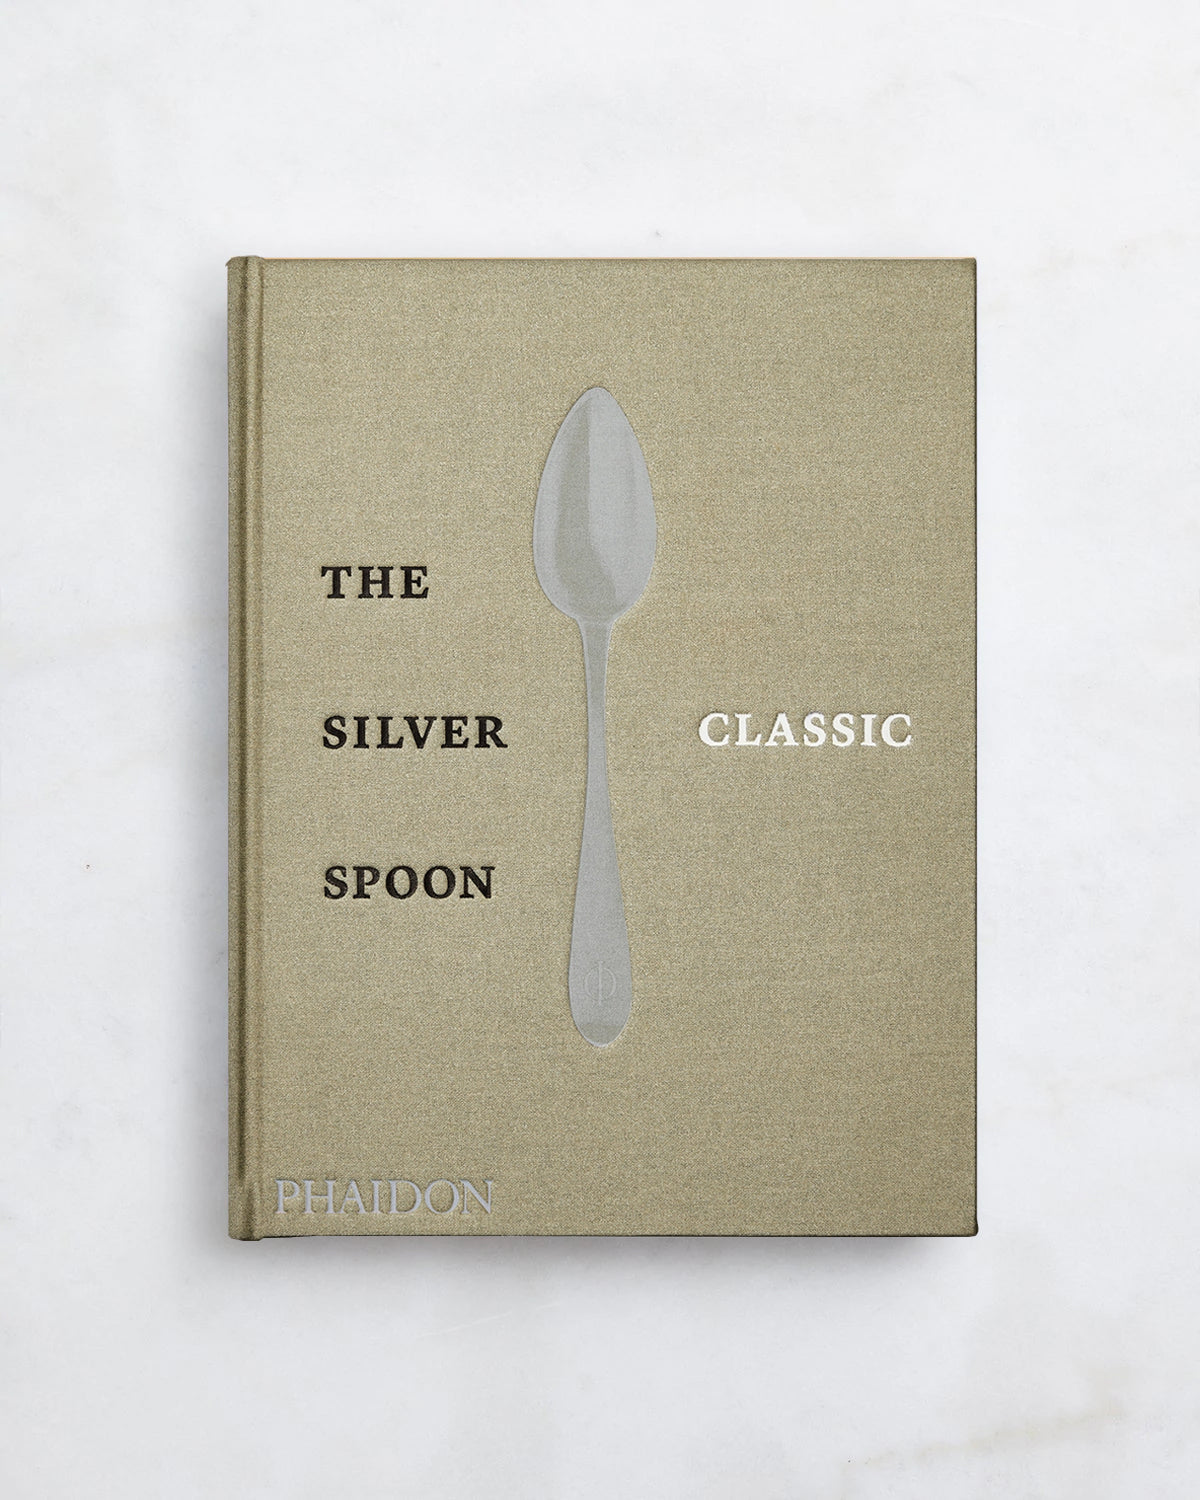 The Silver Spoon Classic by Phaidon